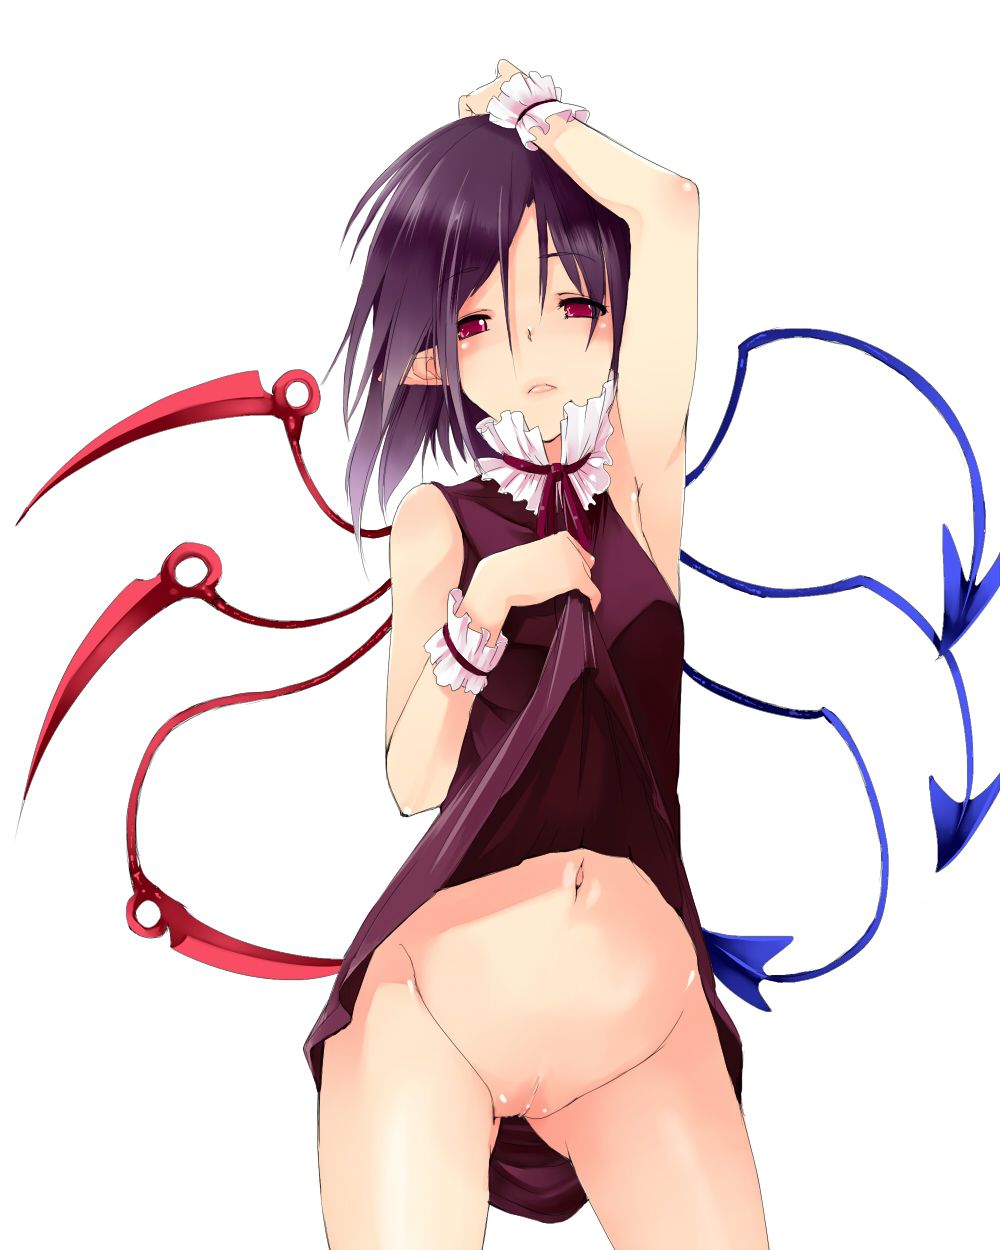 【Feudal Beast Nue-chan】Secondary erotic image of the unidentified but cute black-haired loli girl Feudal Beast Nue-chan of the Touhou Project 65